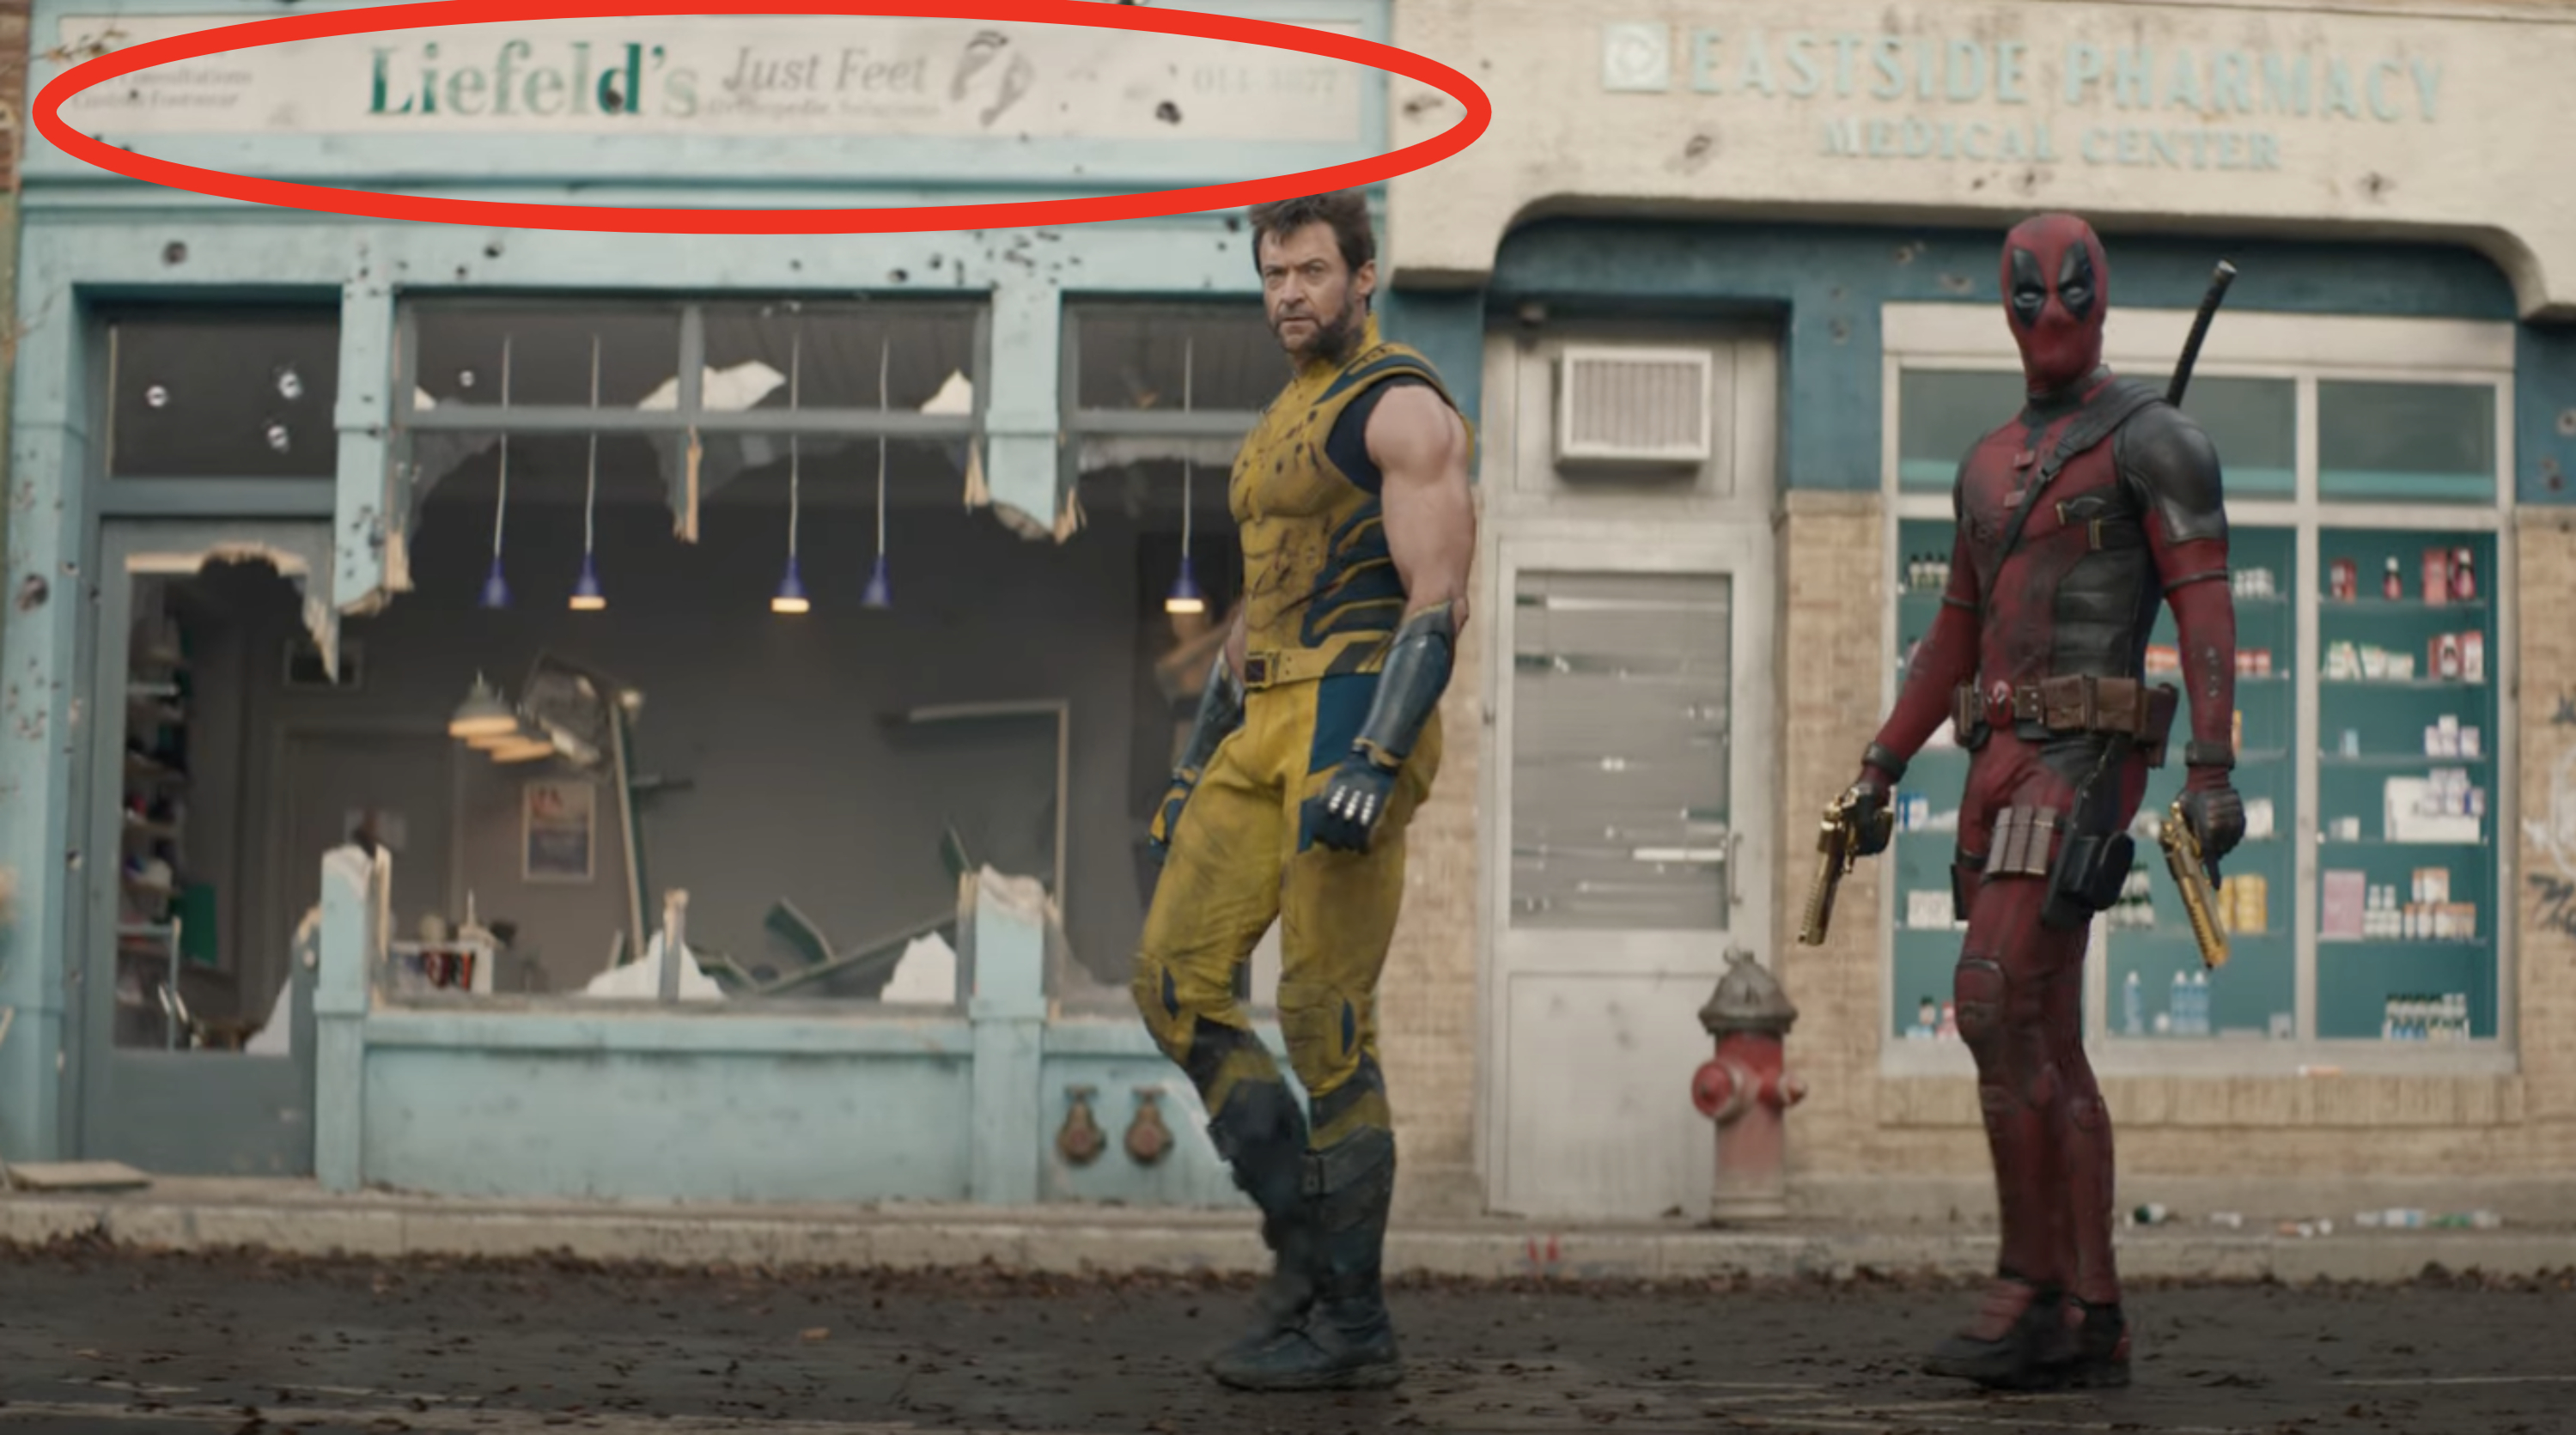 Wolverine and Deadpool stand on a seemingly damaged street in front of Liefeld&#x27;s Just Feet